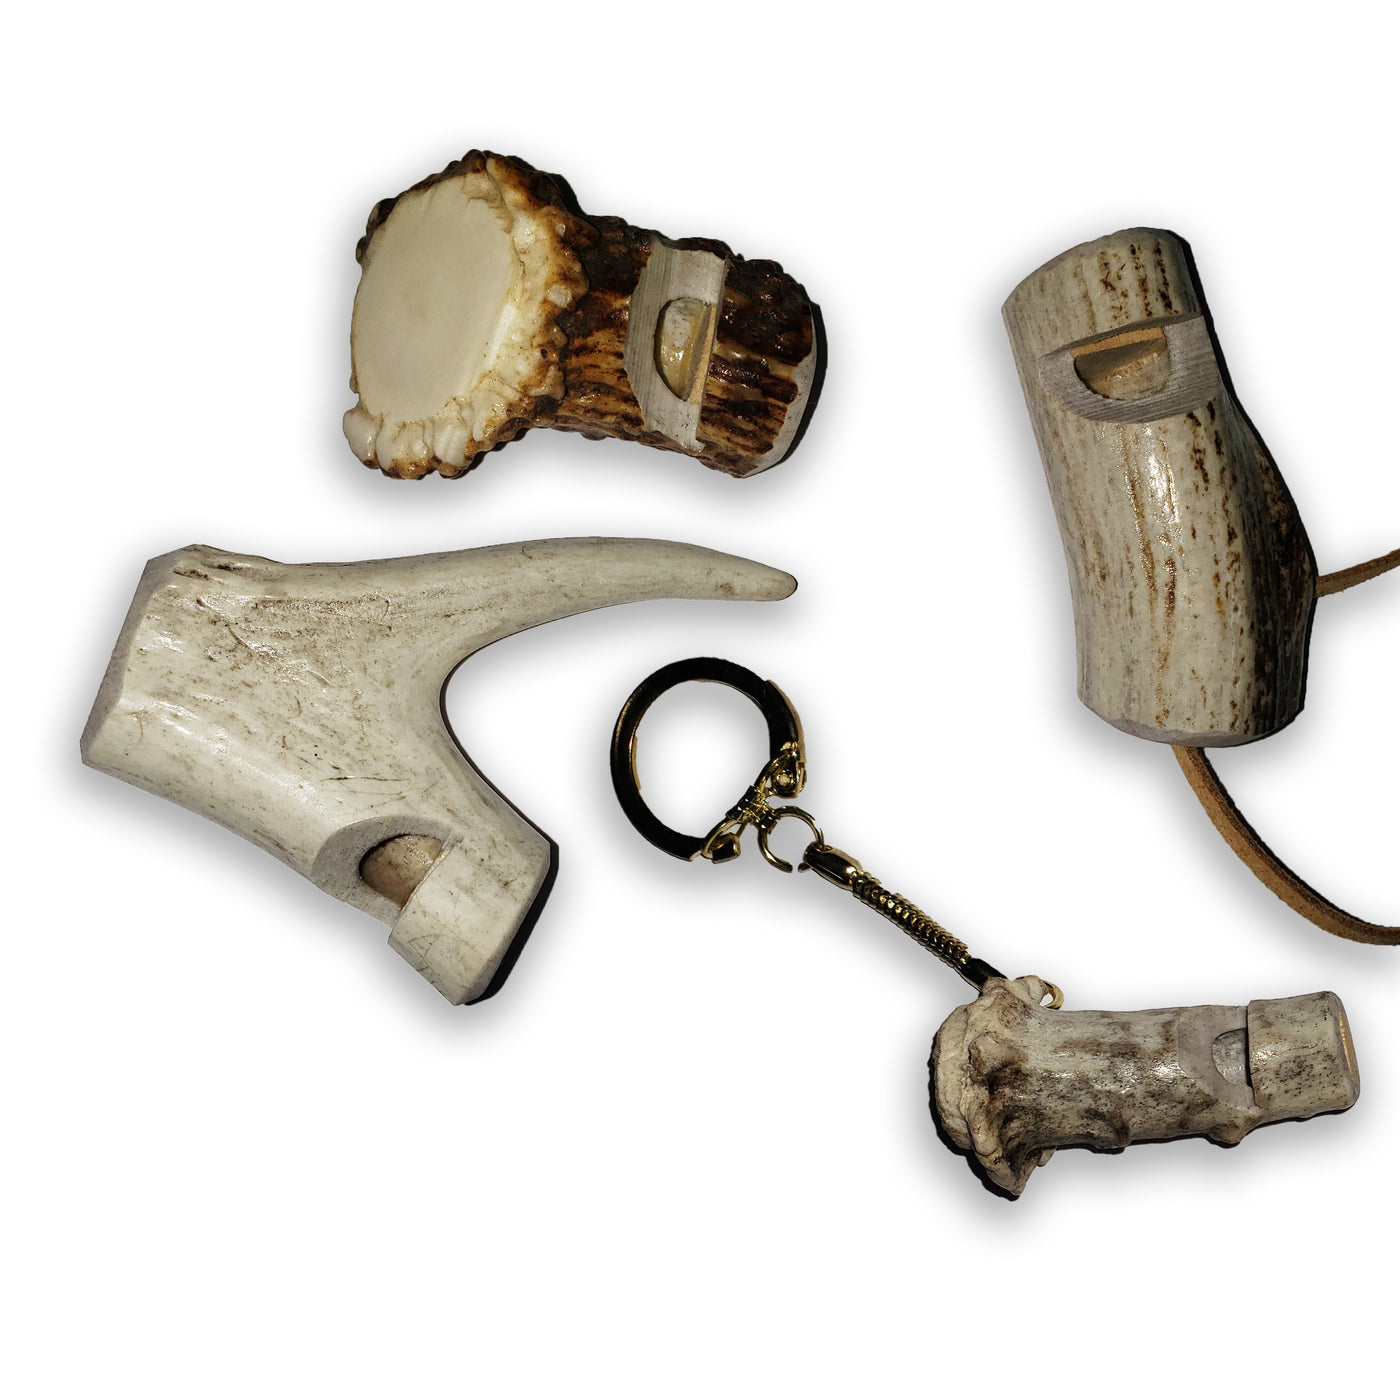 Random assorted whistles made from real antlers